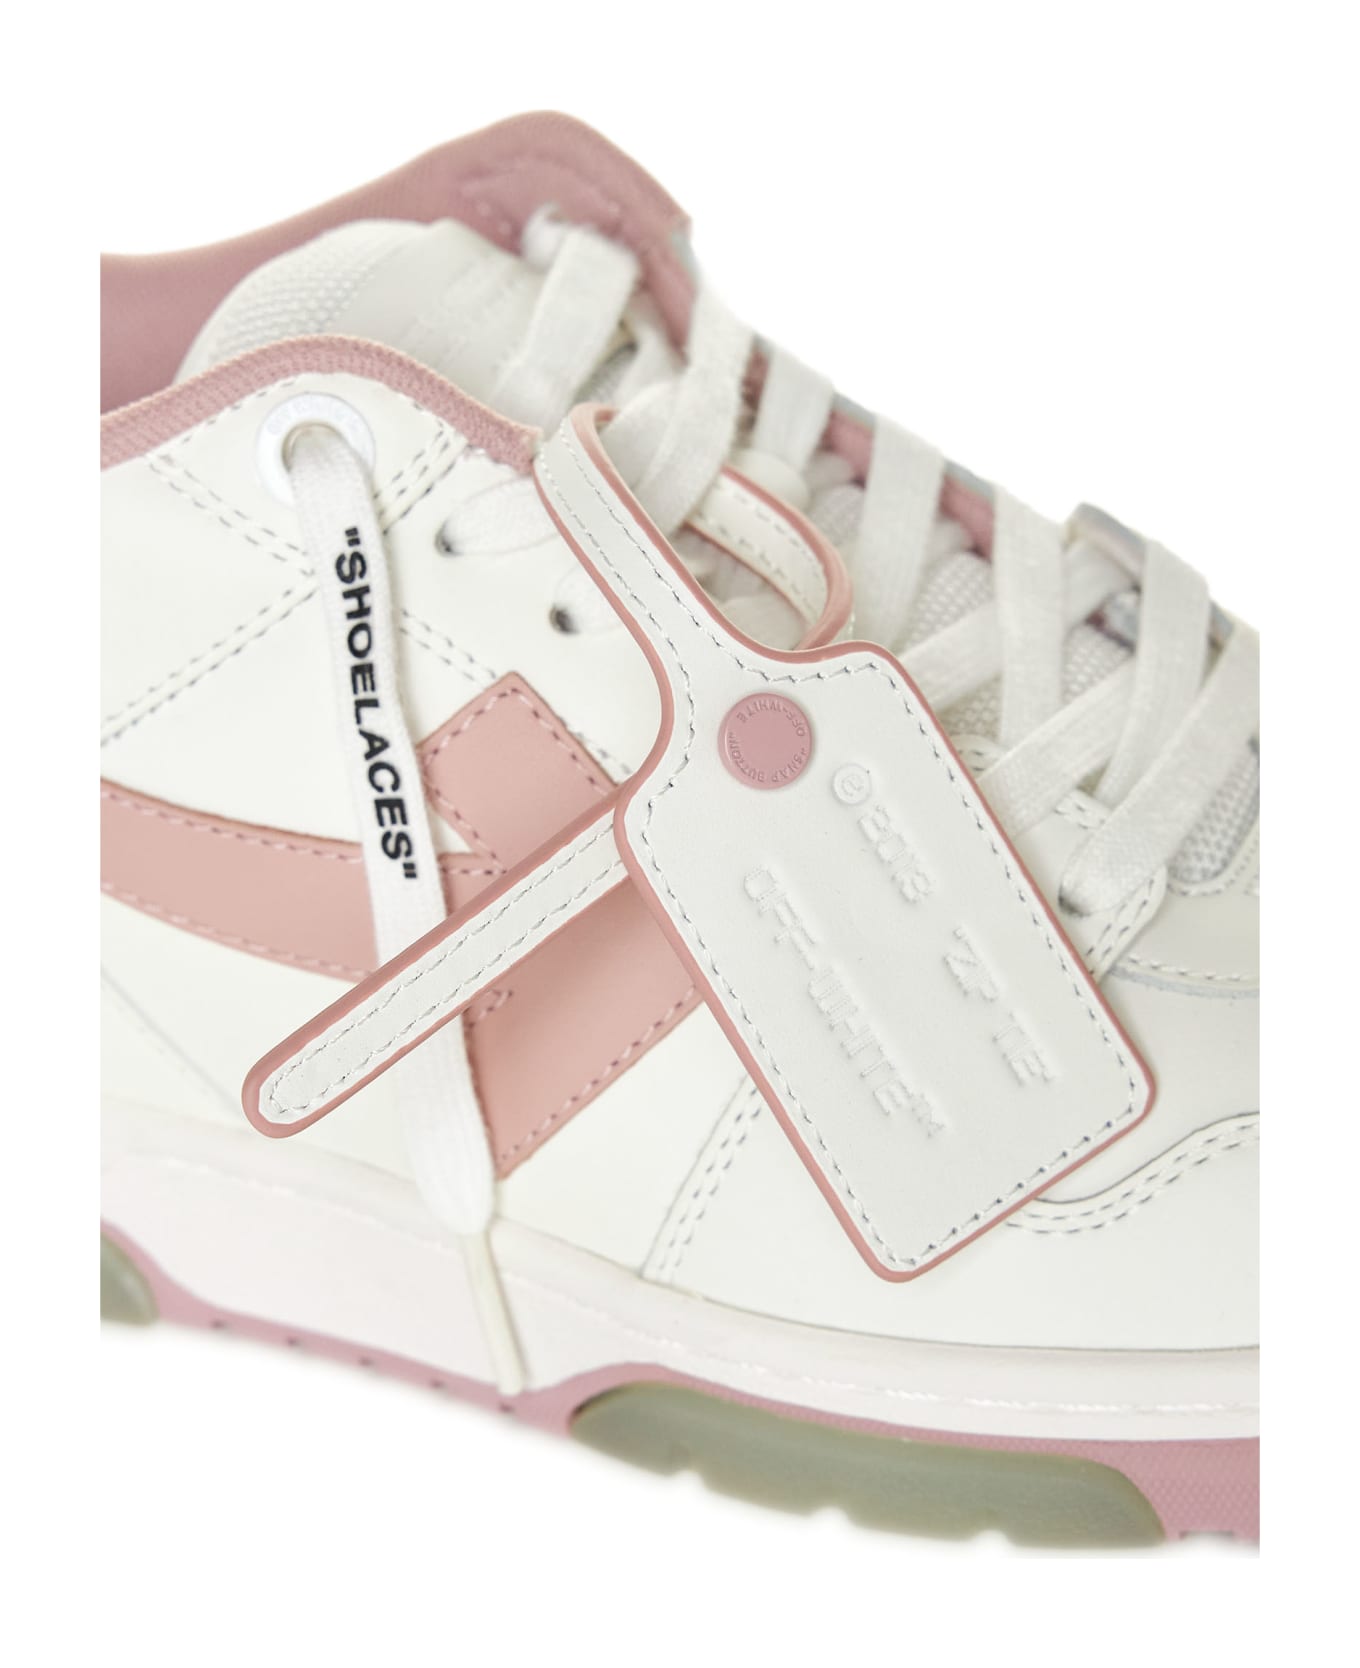 Off-White Sneakers - Pink